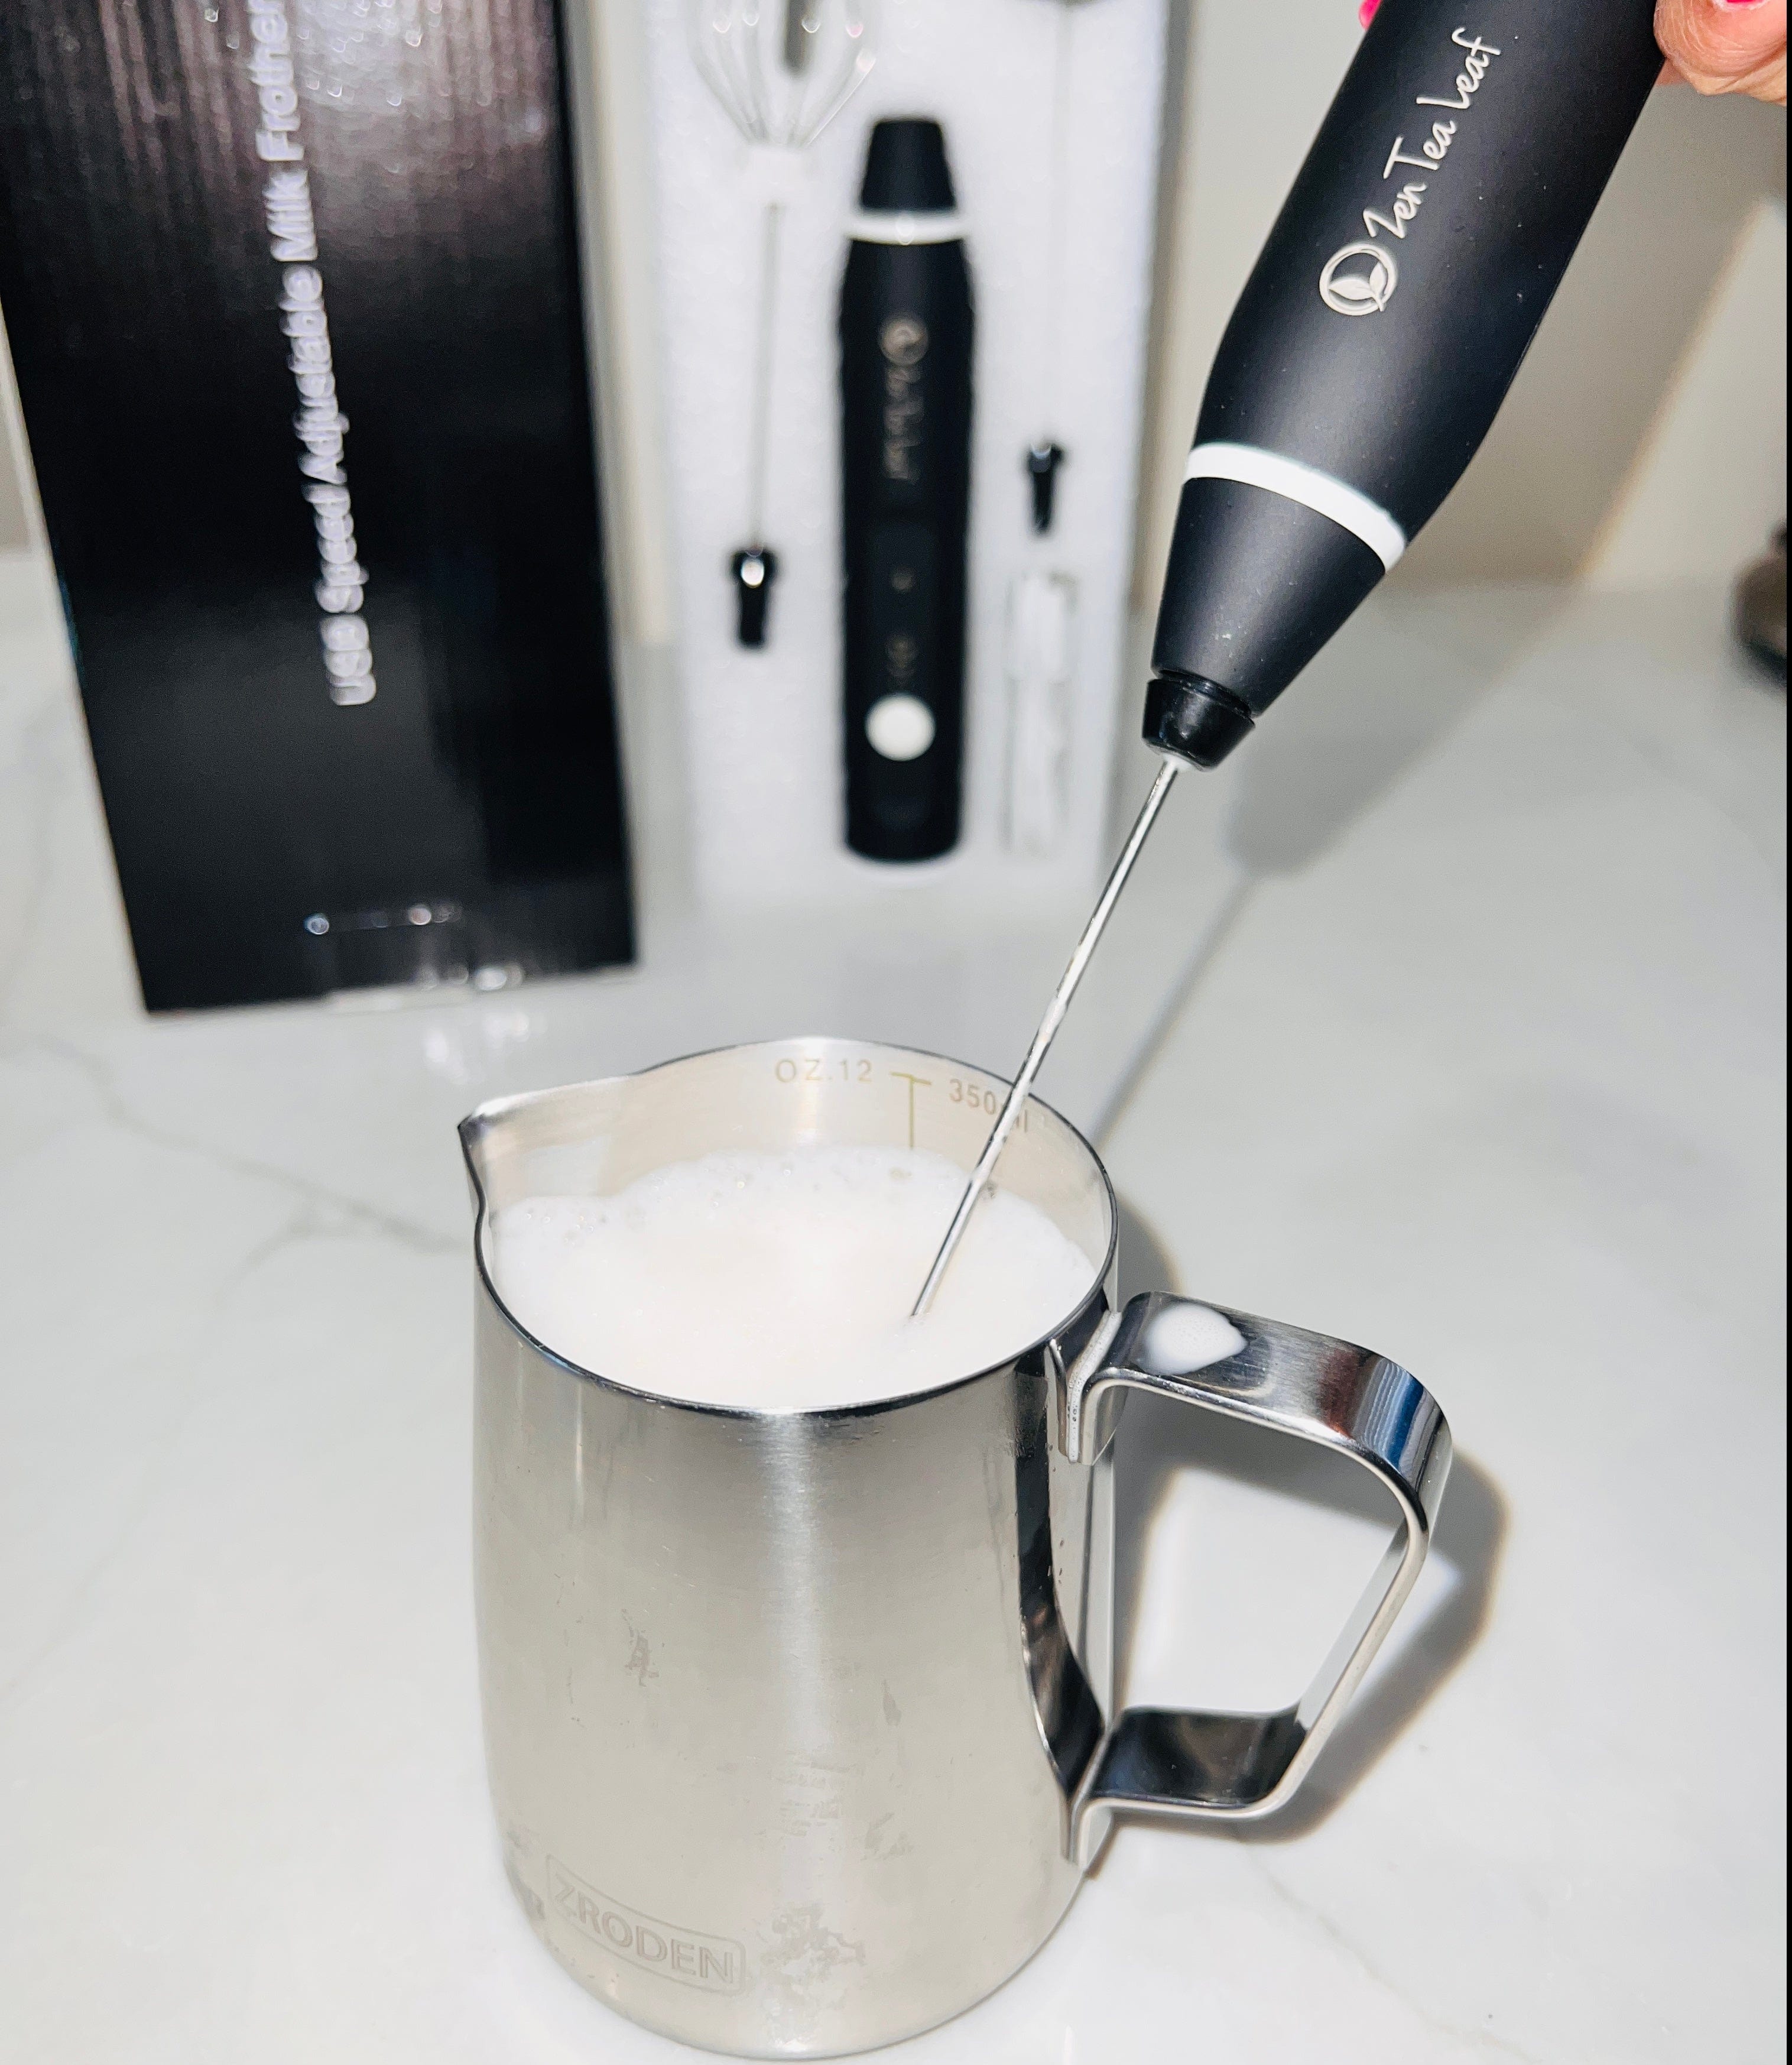 Electric Matcha Whisk / Milk Frother